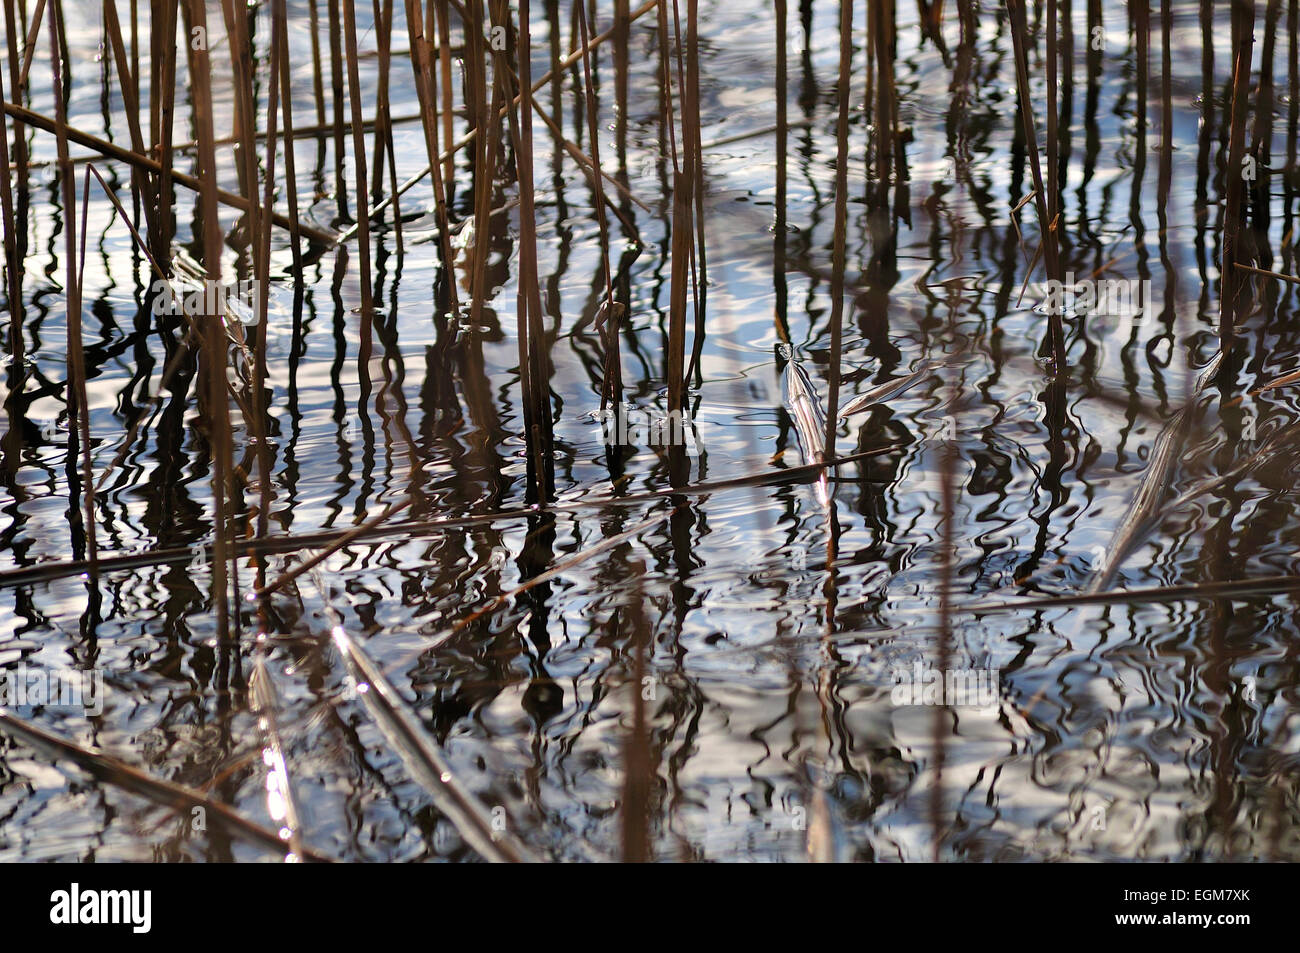 water reeds with abstract rippling reflections Stock Photo